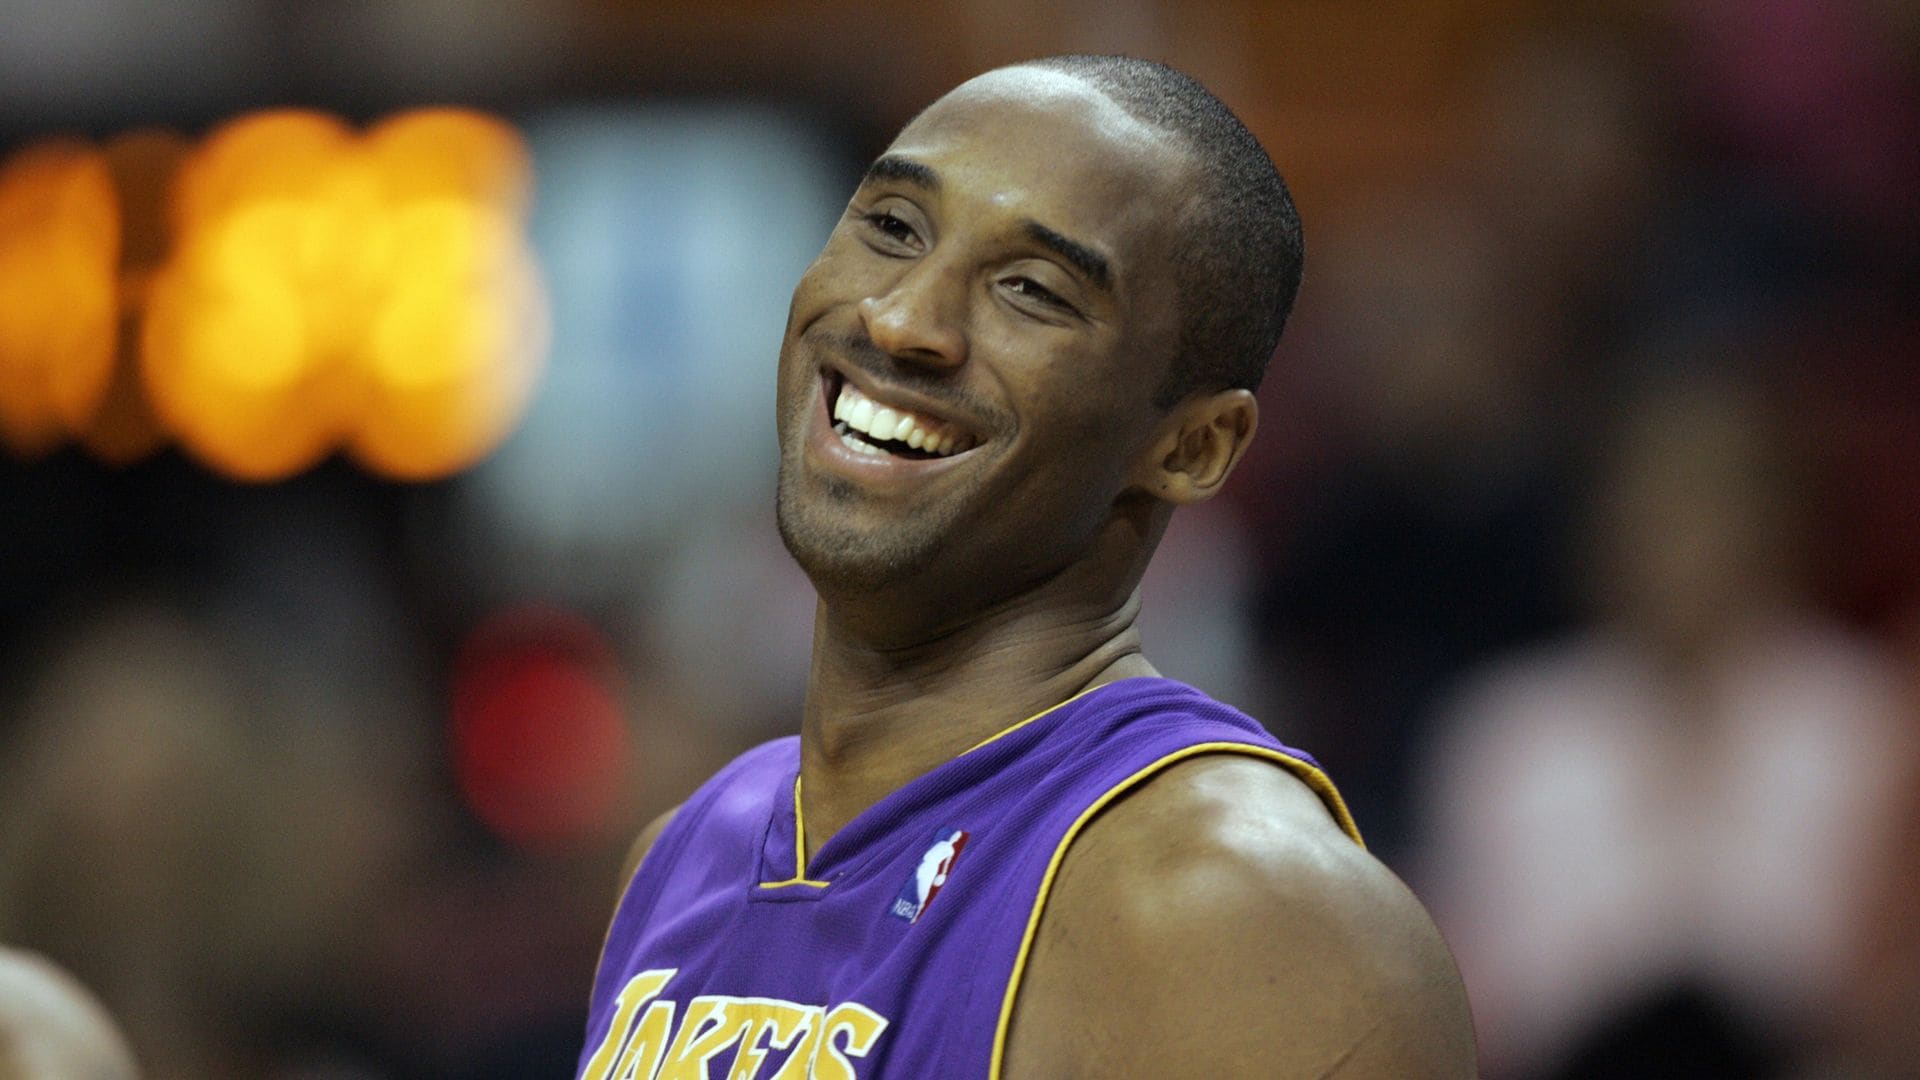 Kobe Bryant's most inspiring quotes about focus, success and perseverance